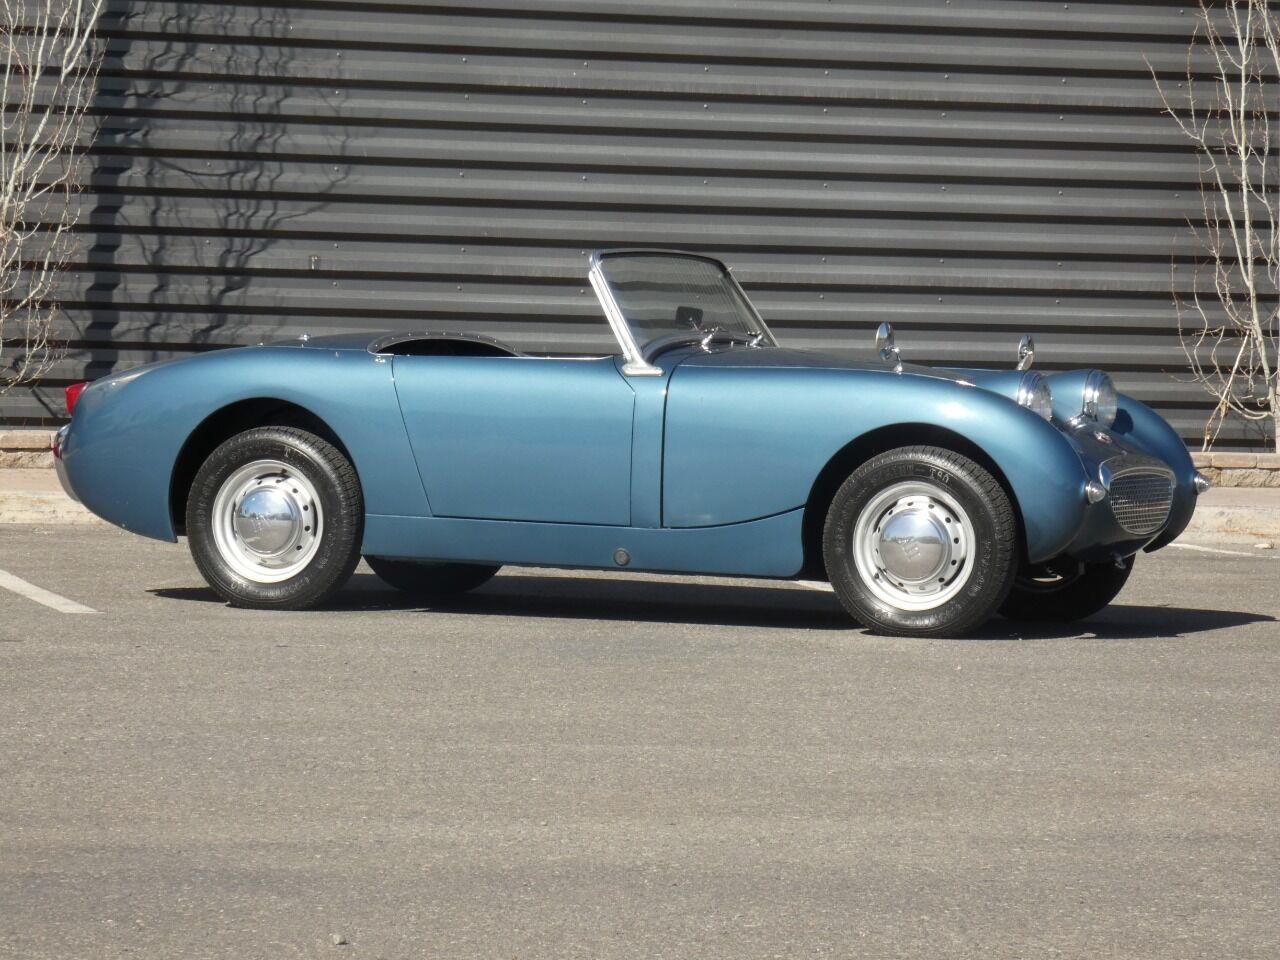 1960 Austin-Healey Sprite for sale in Hailey, ID – photo 98